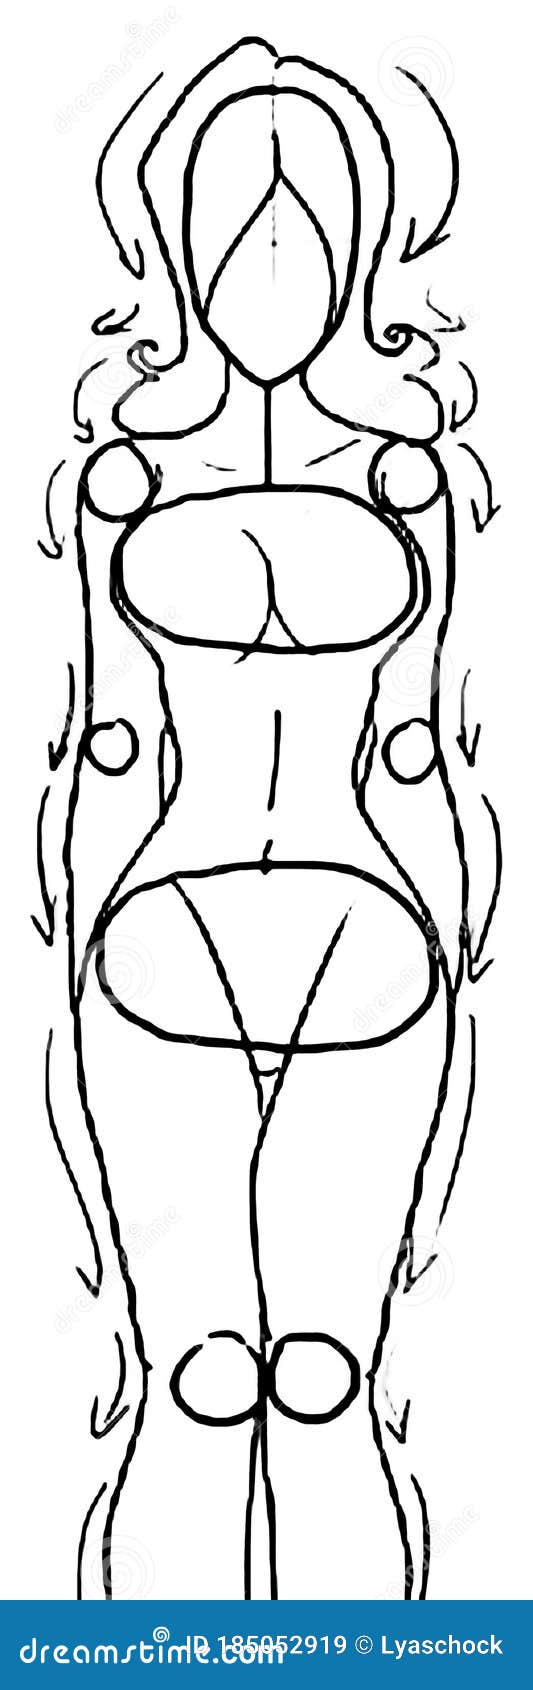 Tutorial Of Drawing Female Body. Drawing The Human Body, Step By Step